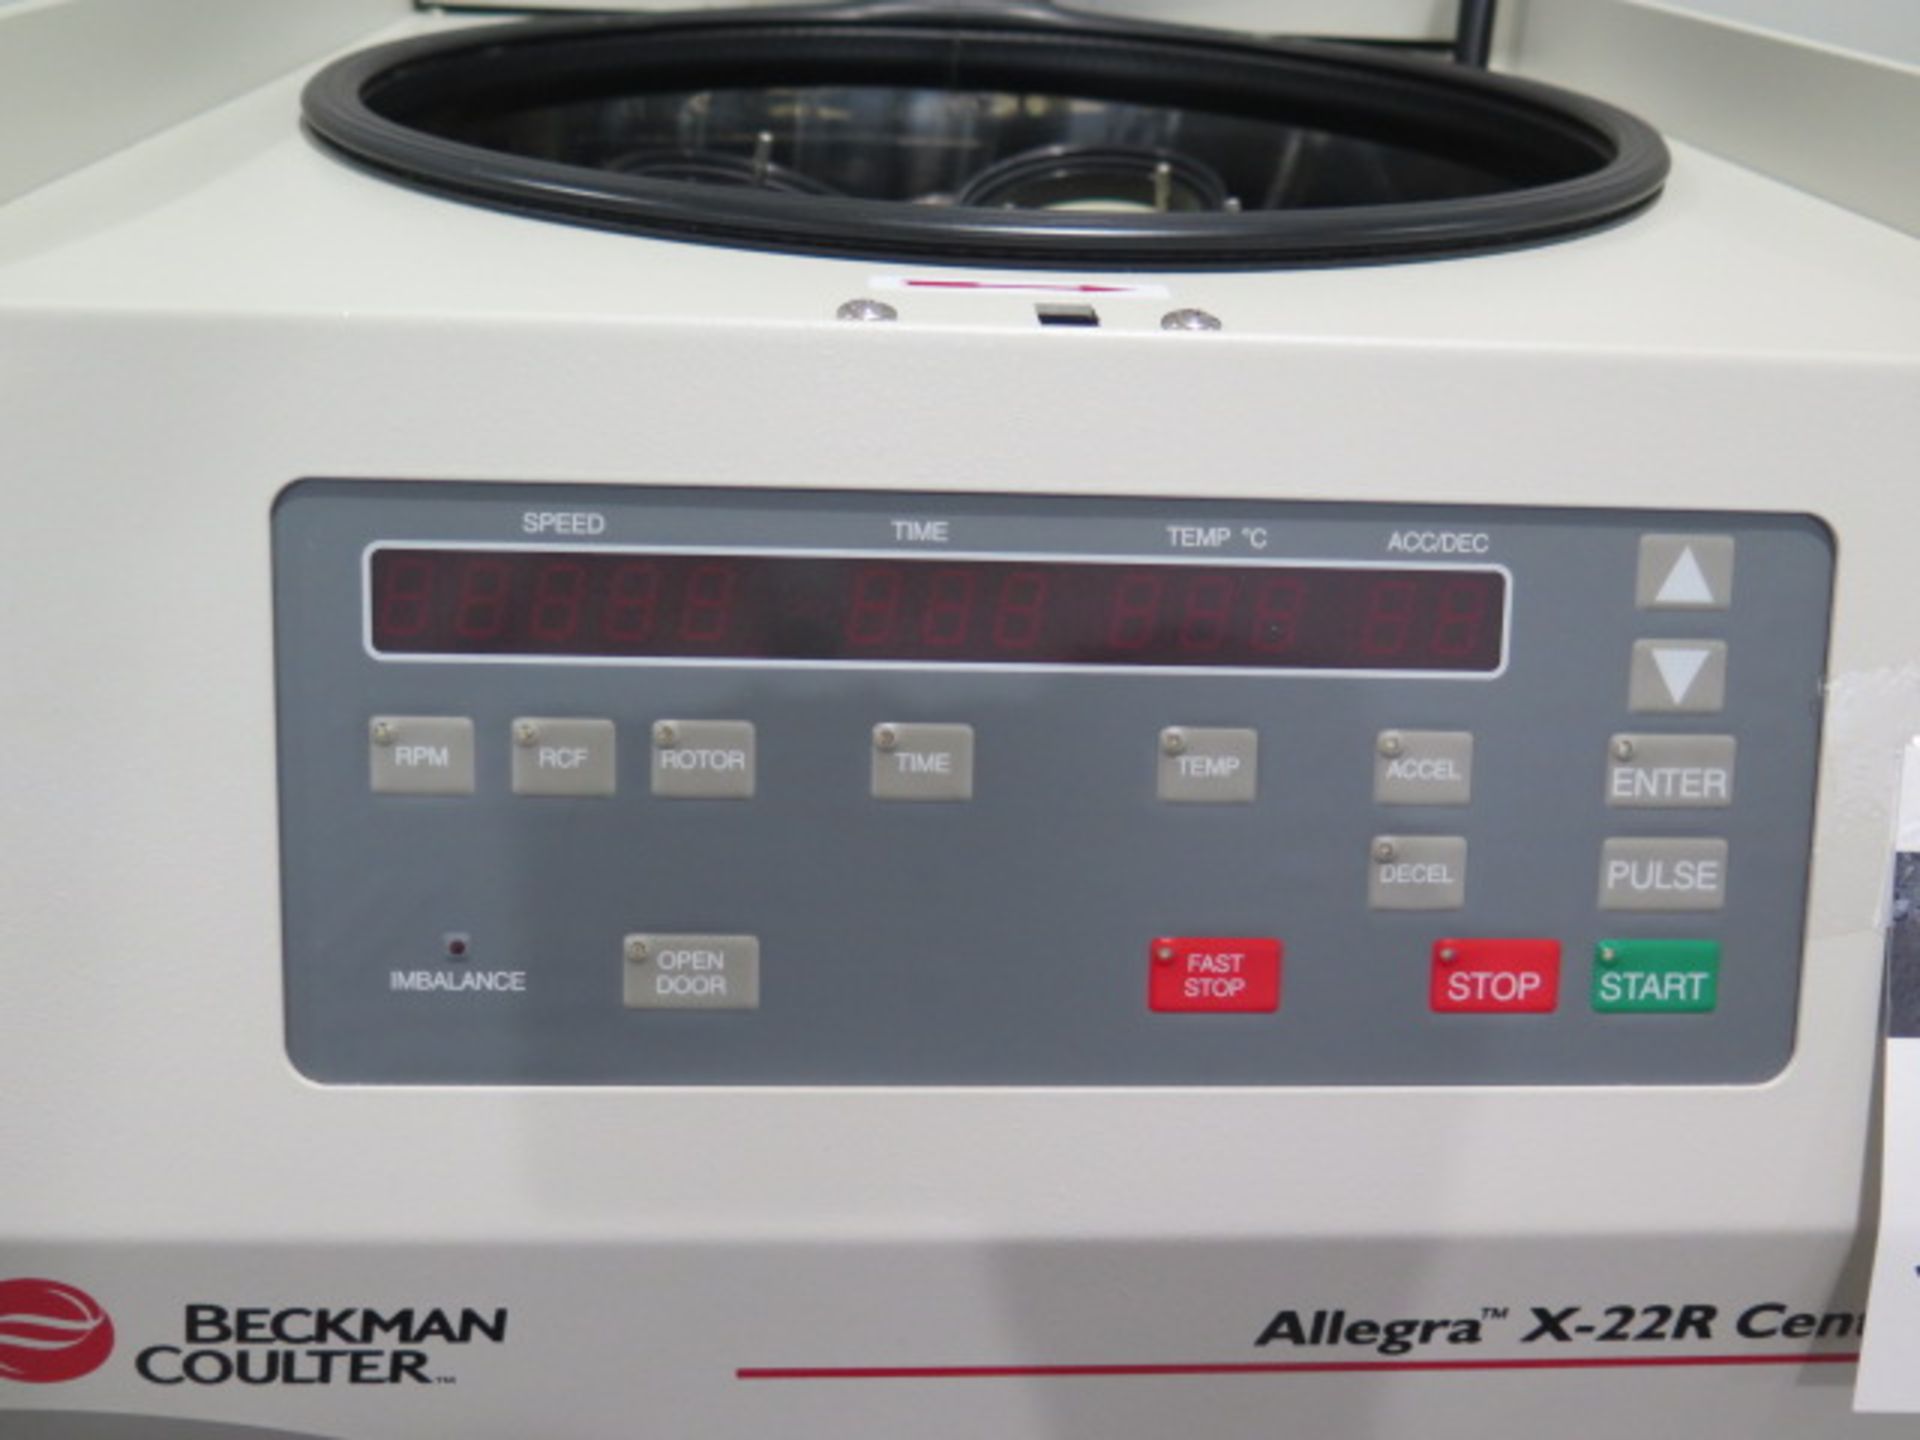 Beckman Coulter Allegra X-22R Centrifuge s/n ALB11B013 (SOLD AS-IS - NO WARRANTY) (SOLD AS-IS - NO - Image 6 of 9